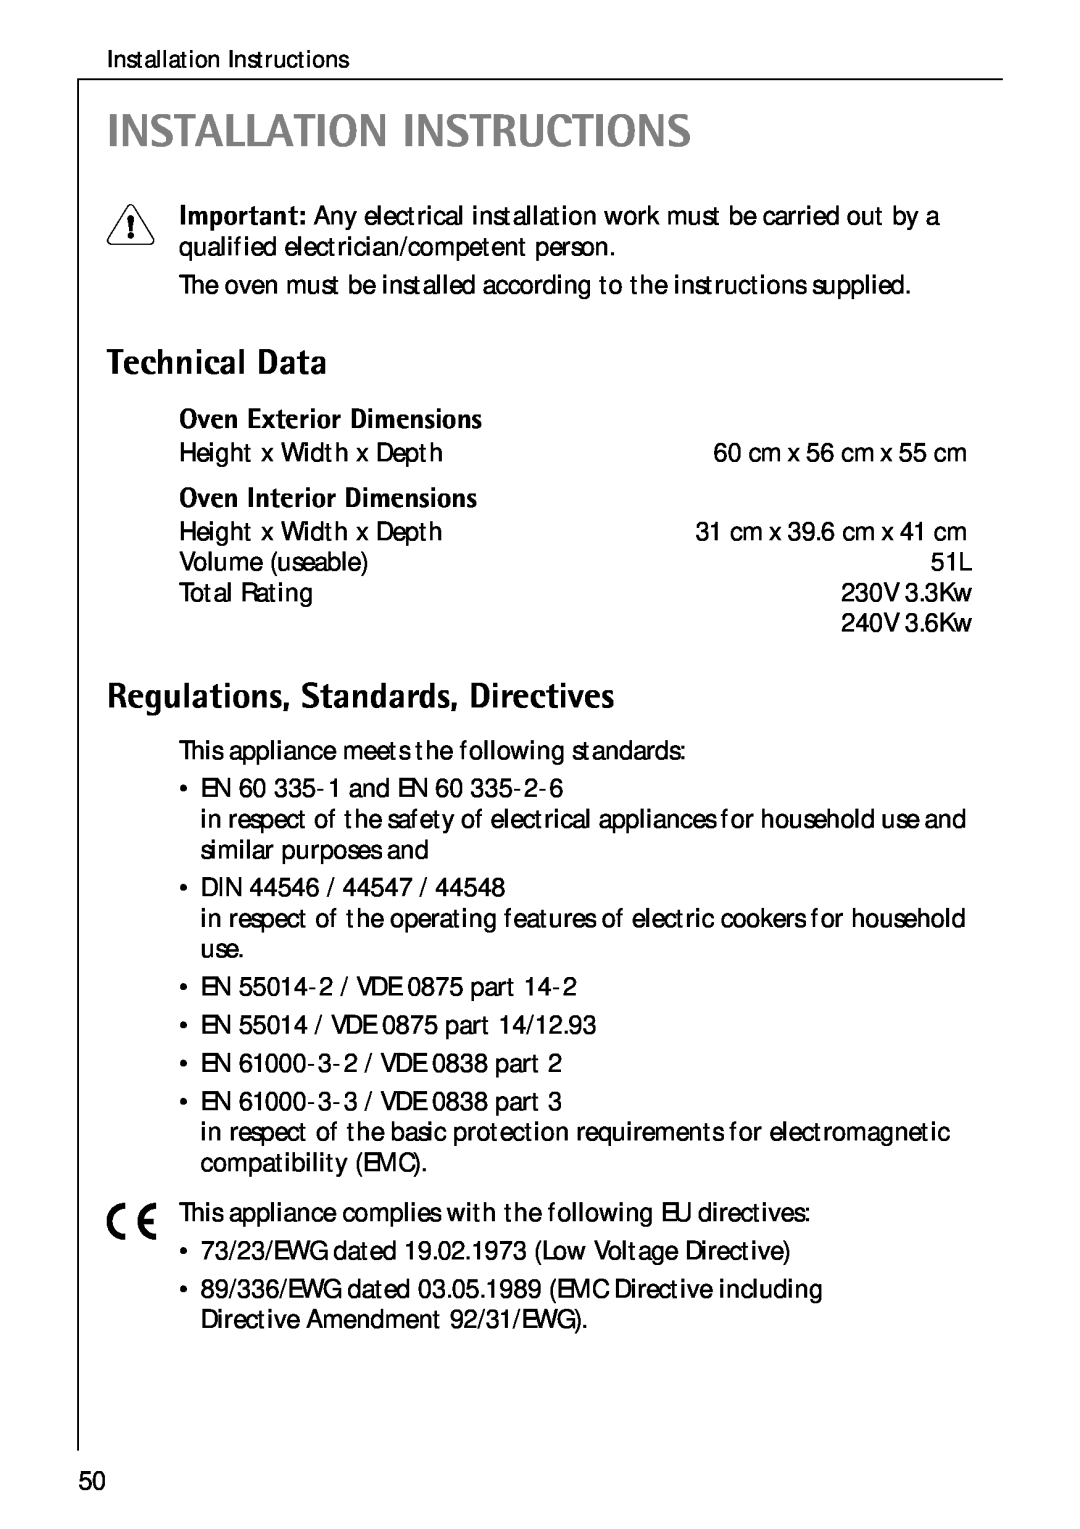 Electrolux B 4100 Installation Instructions, Technical Data, Regulations, Standards, Directives, Oven Exterior Dimensions 